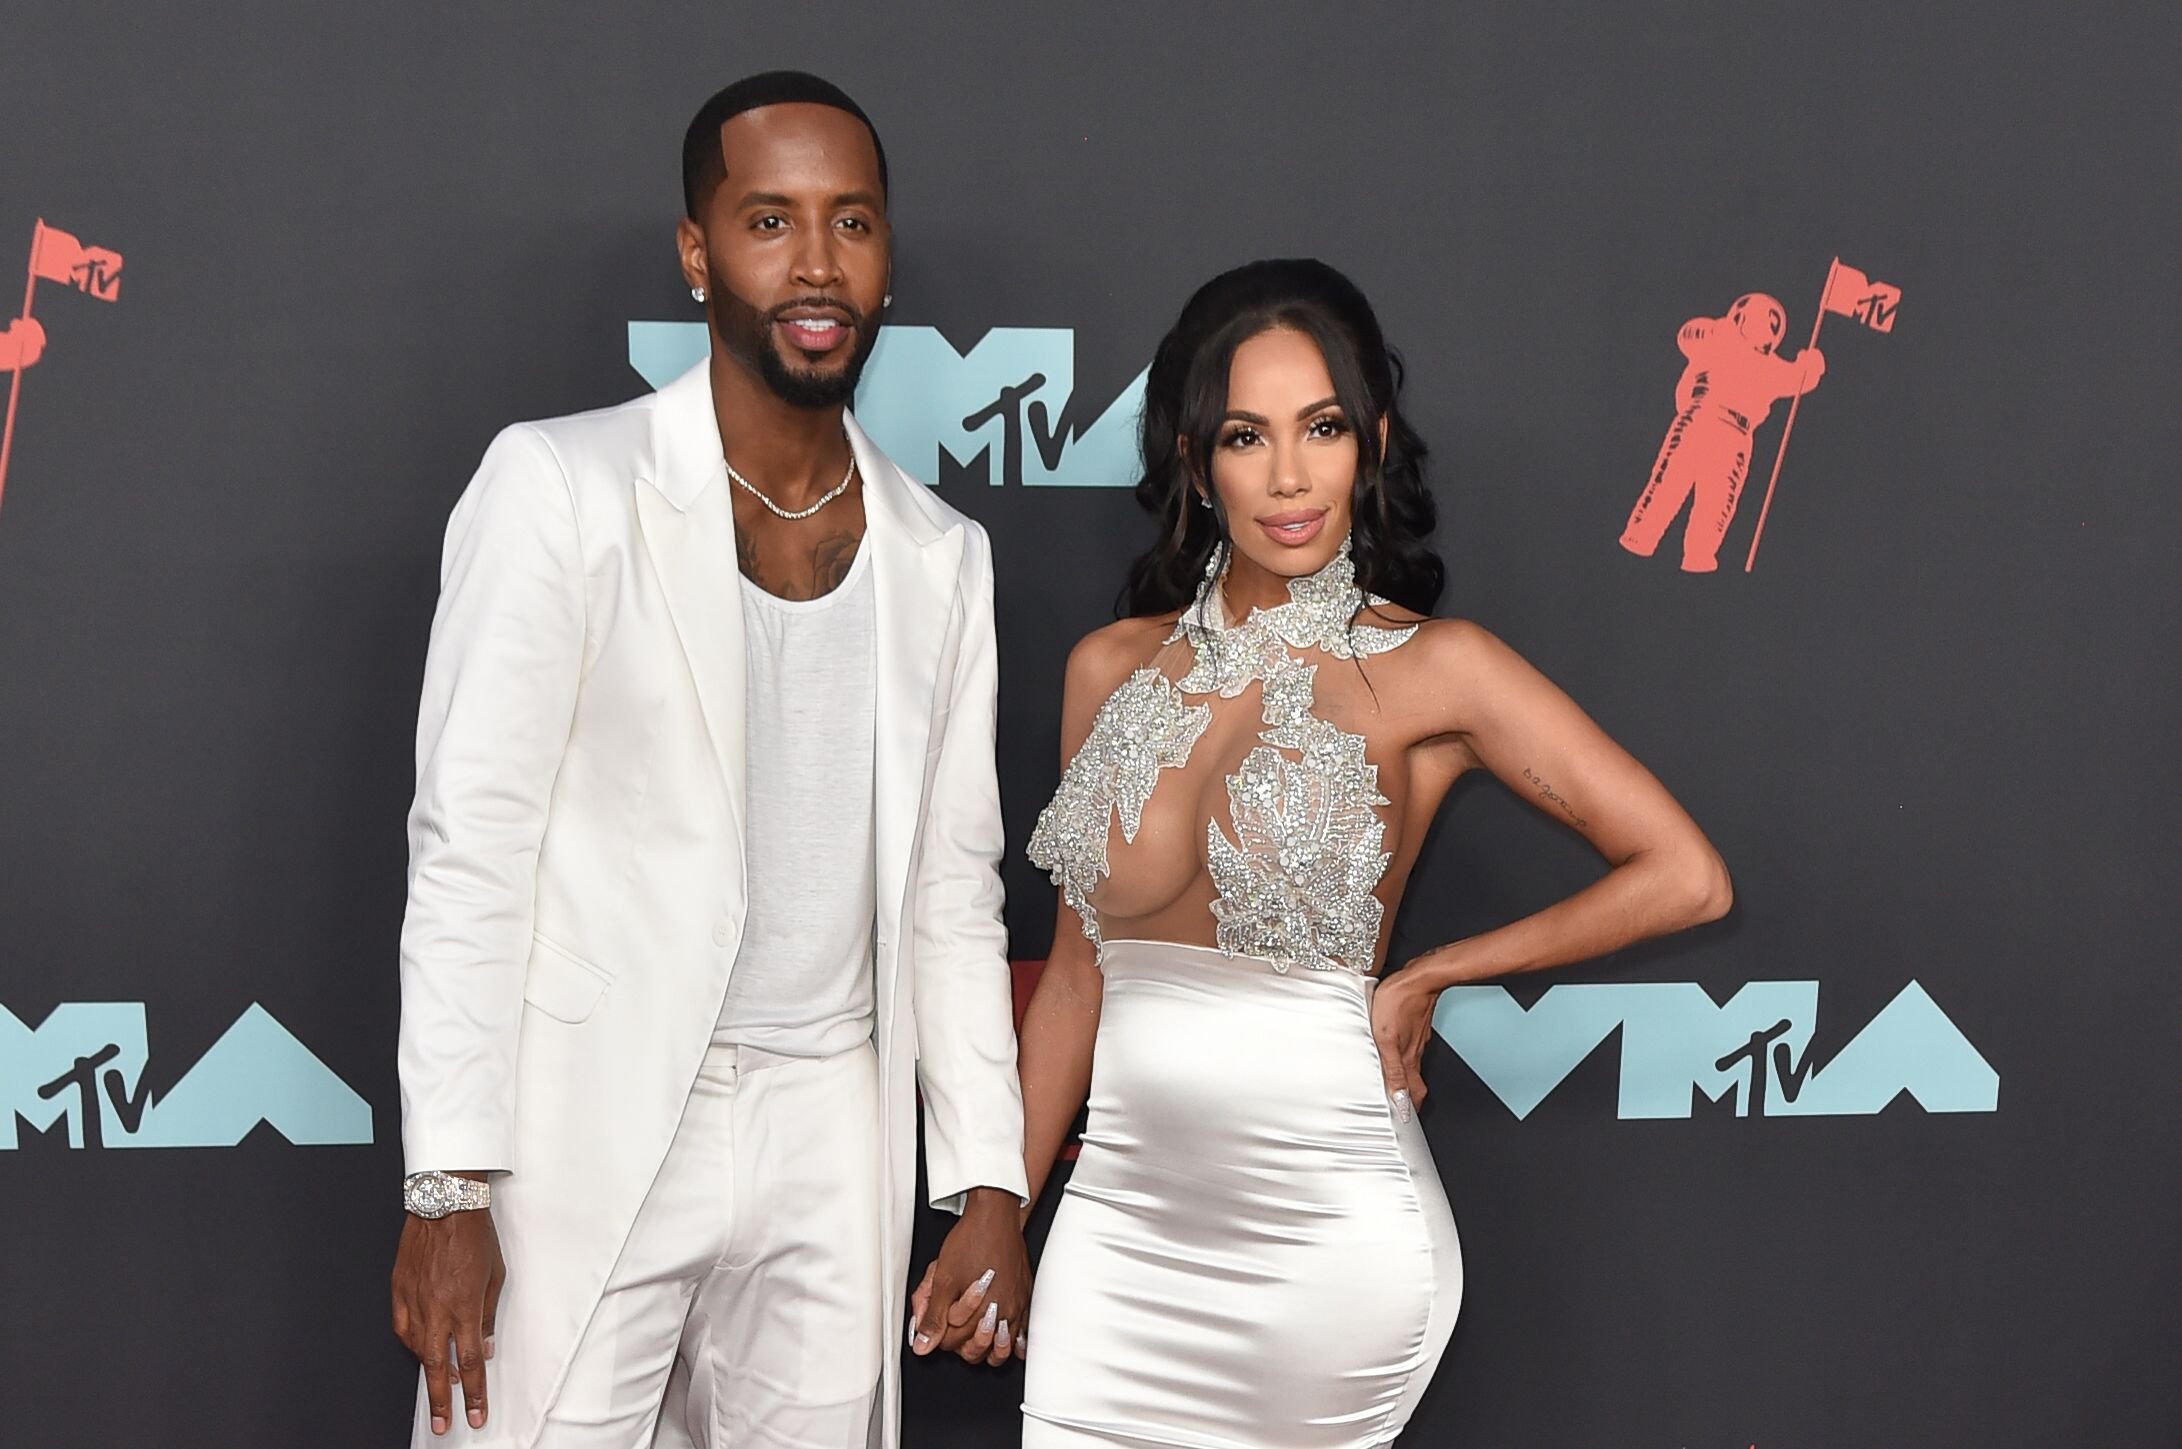 Safaree Samuels and Erica Mena Samuels attend the 2019 MTV Video Music Awards/ Source: Getty Images